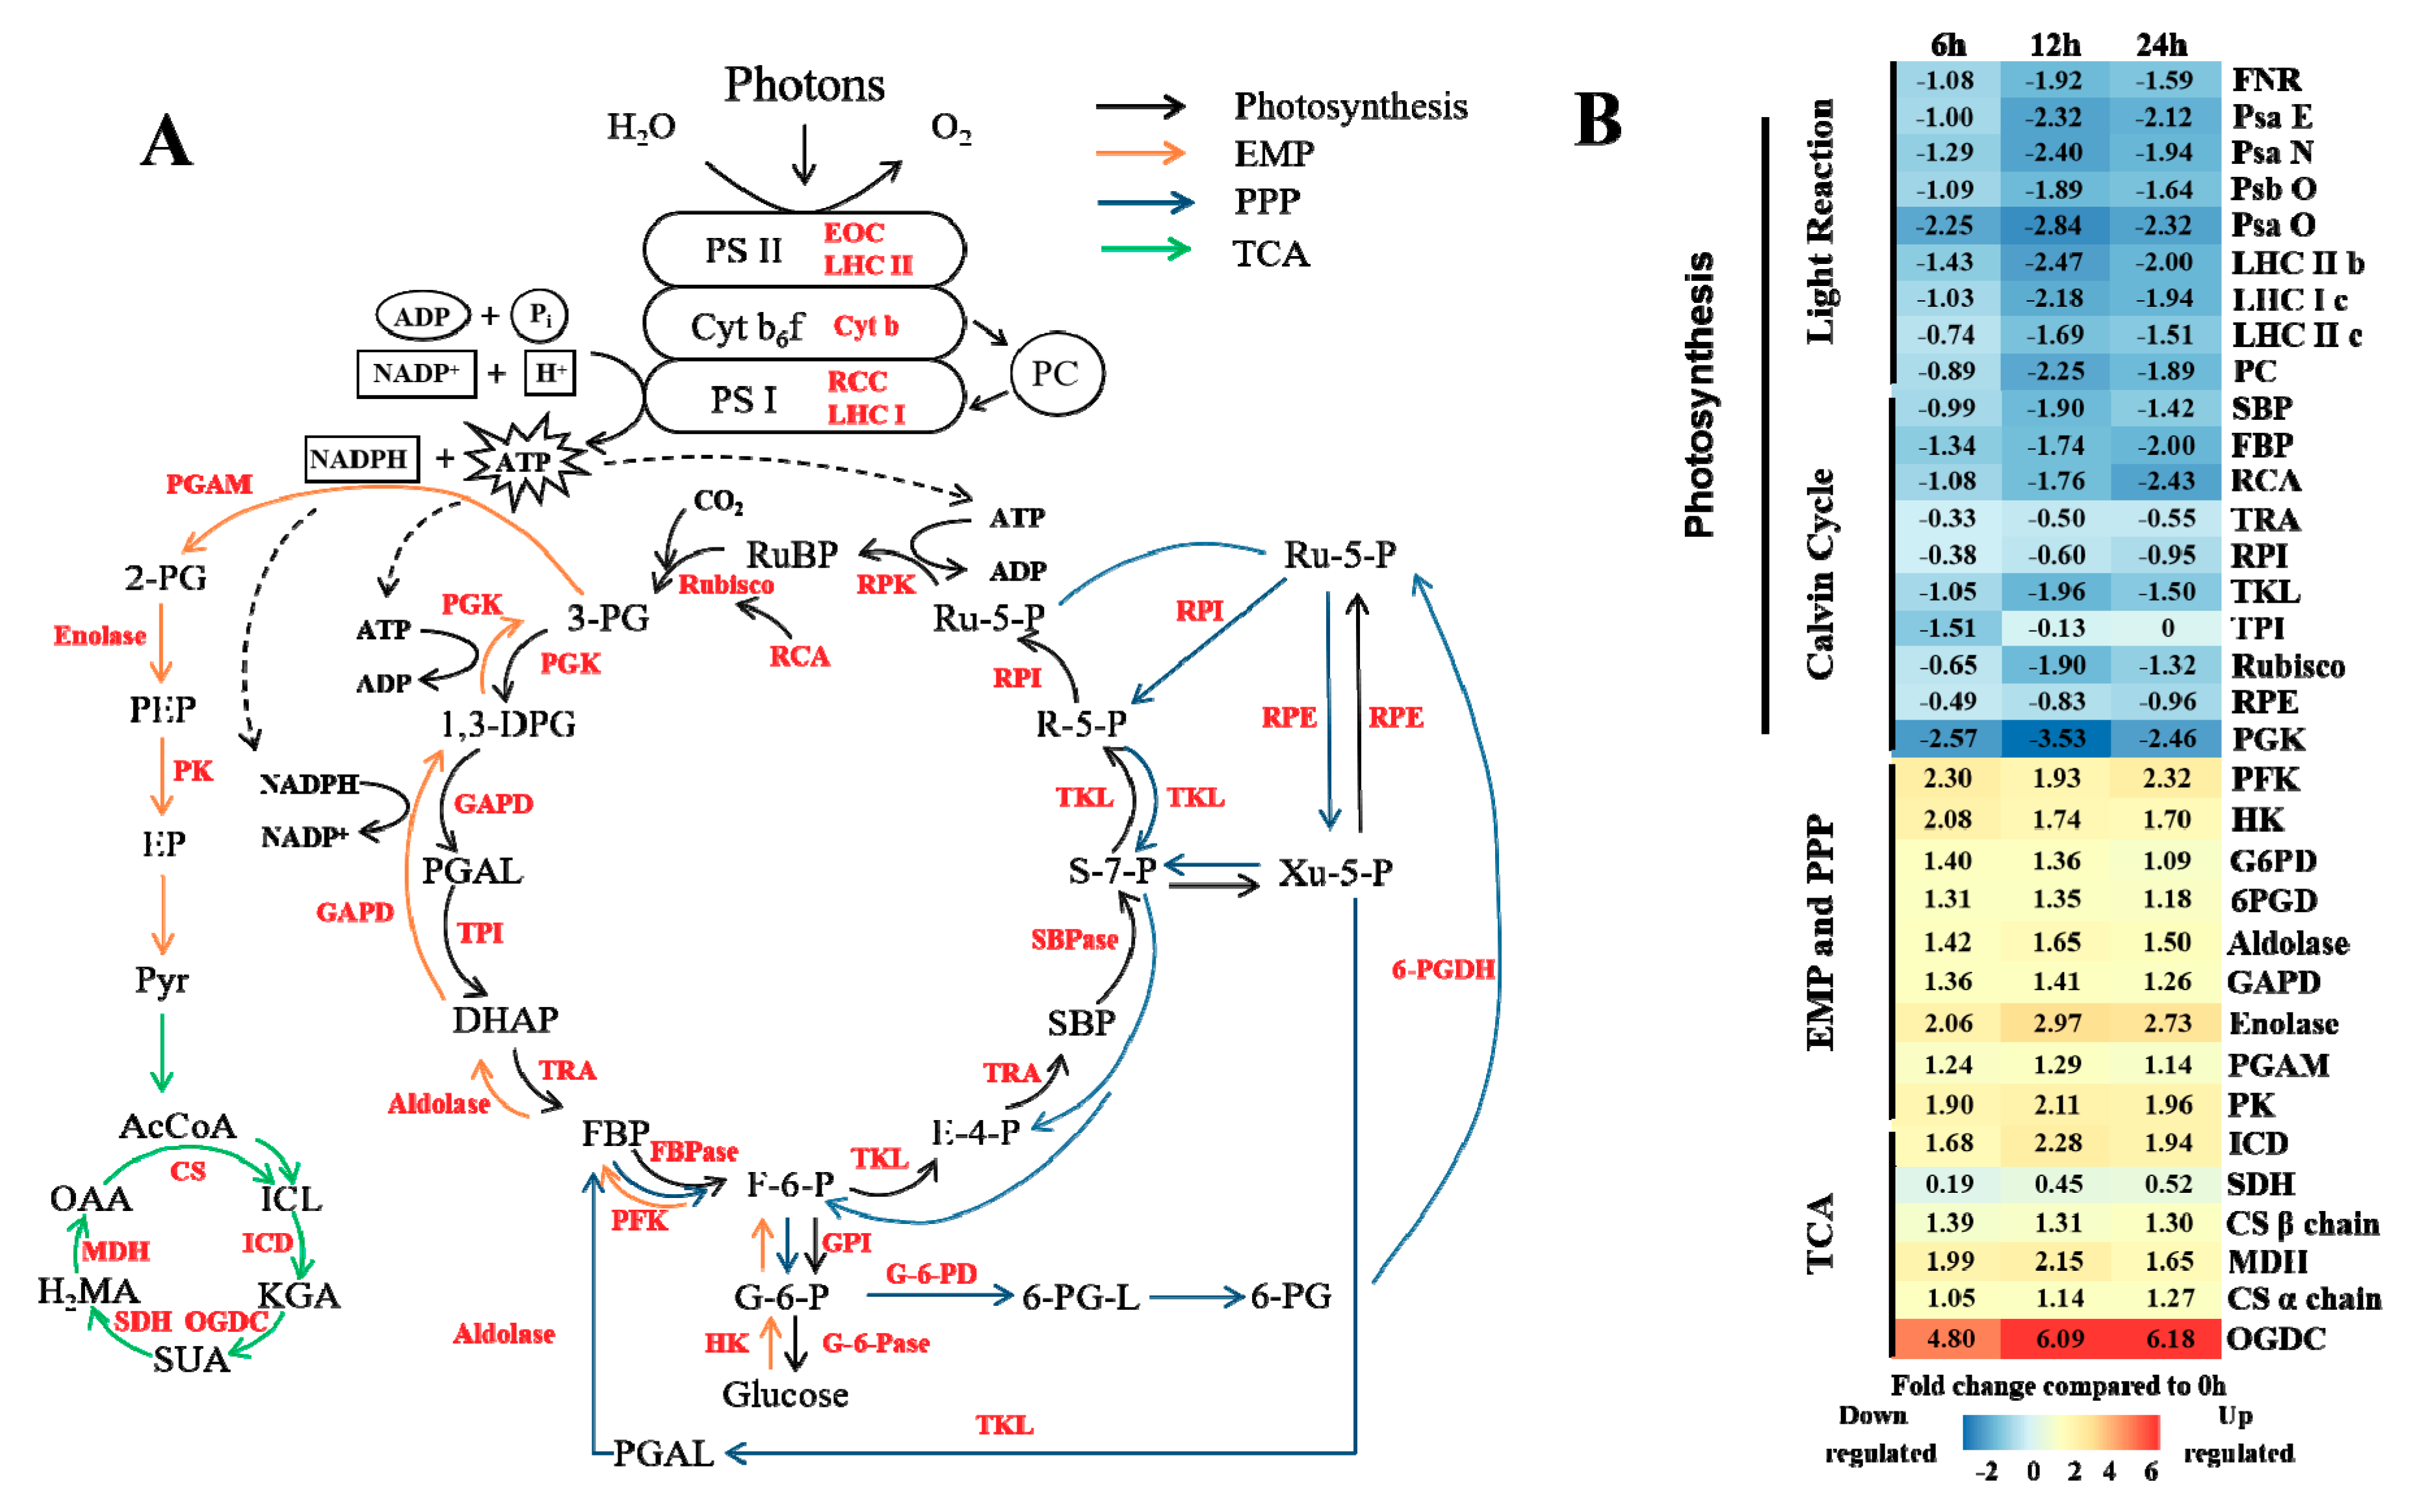 CO2 concentration on energy metabolism